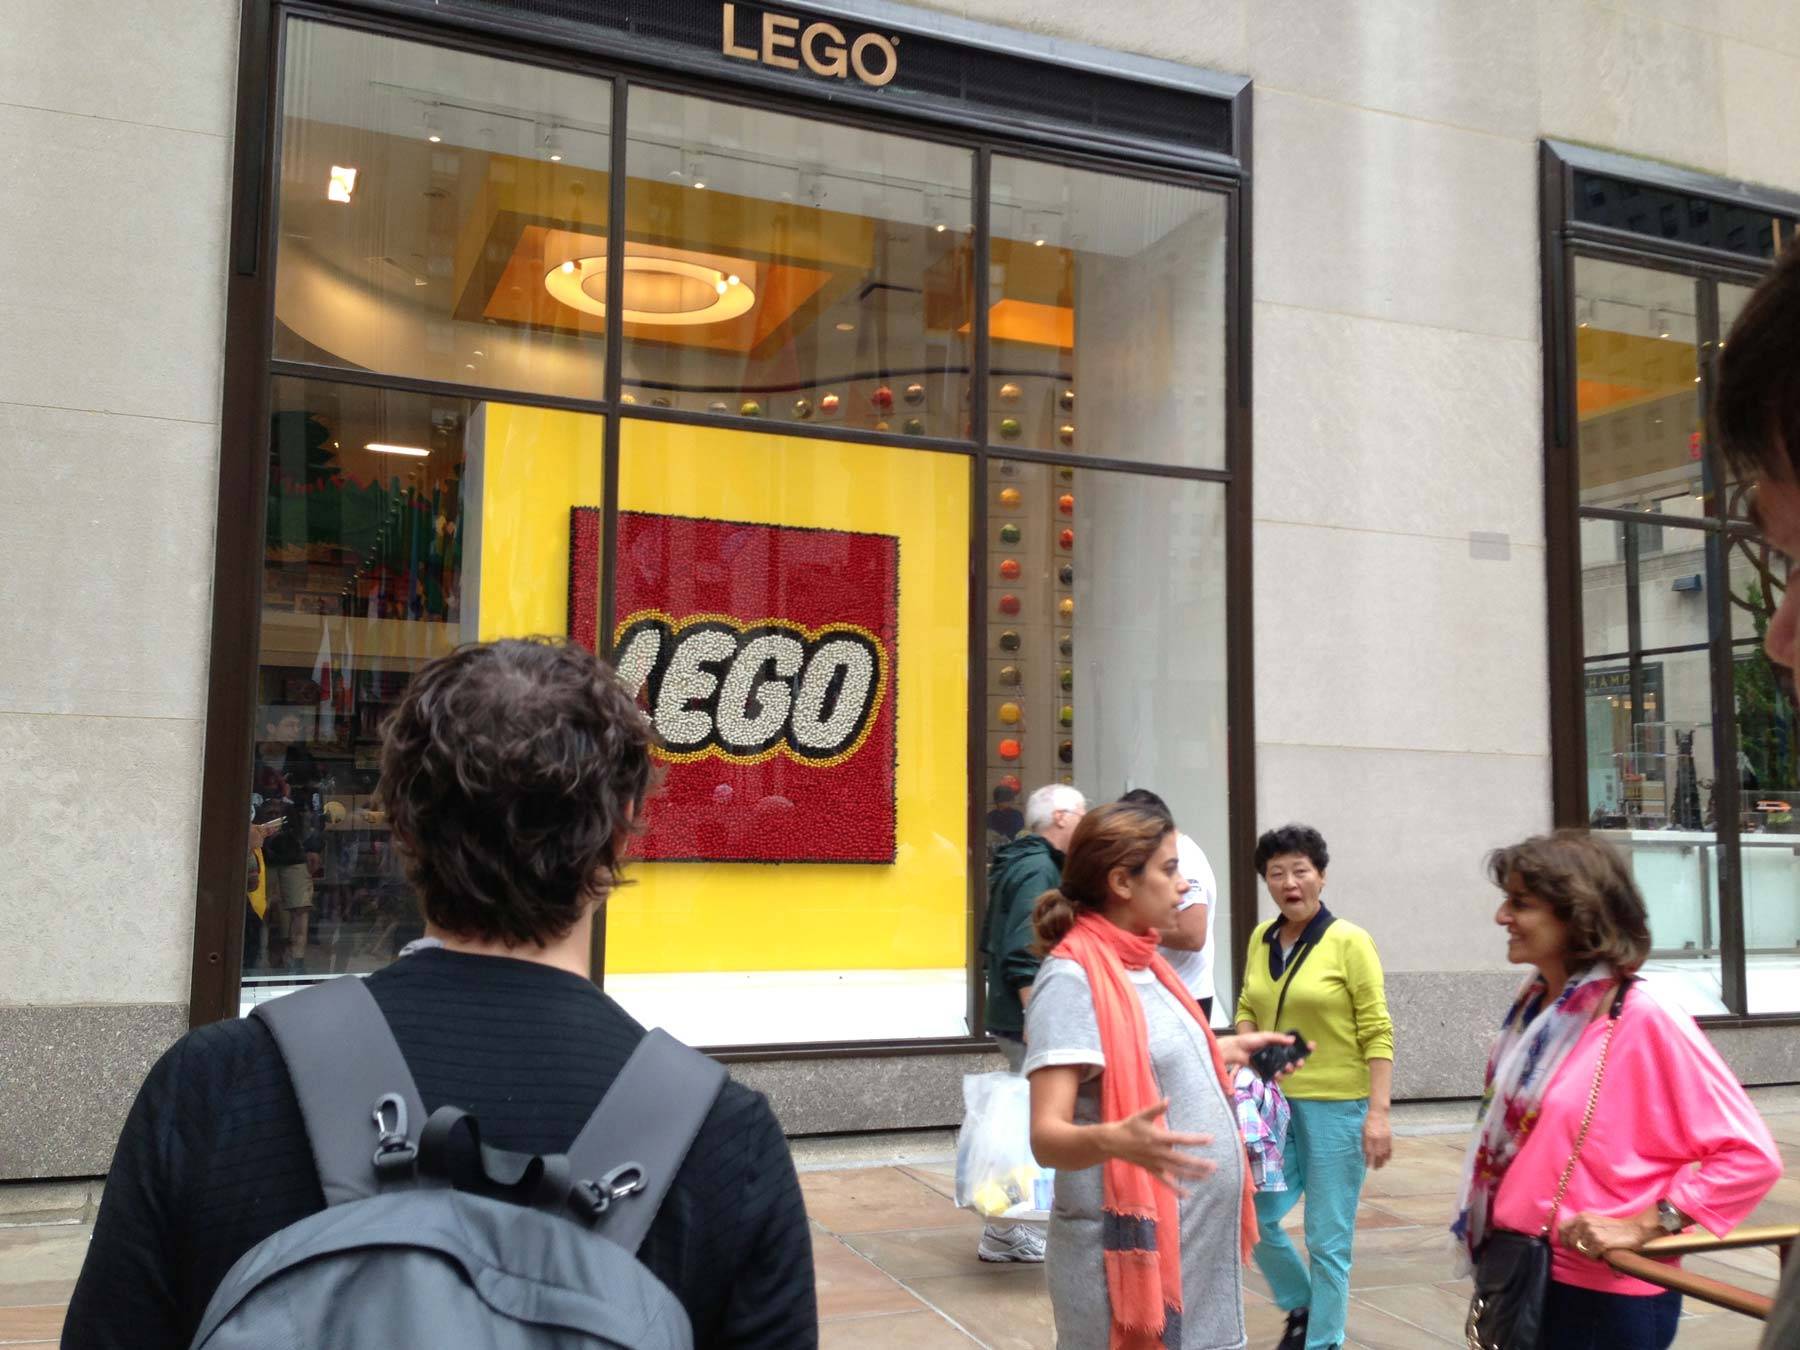 Richard approaching the LEGO store